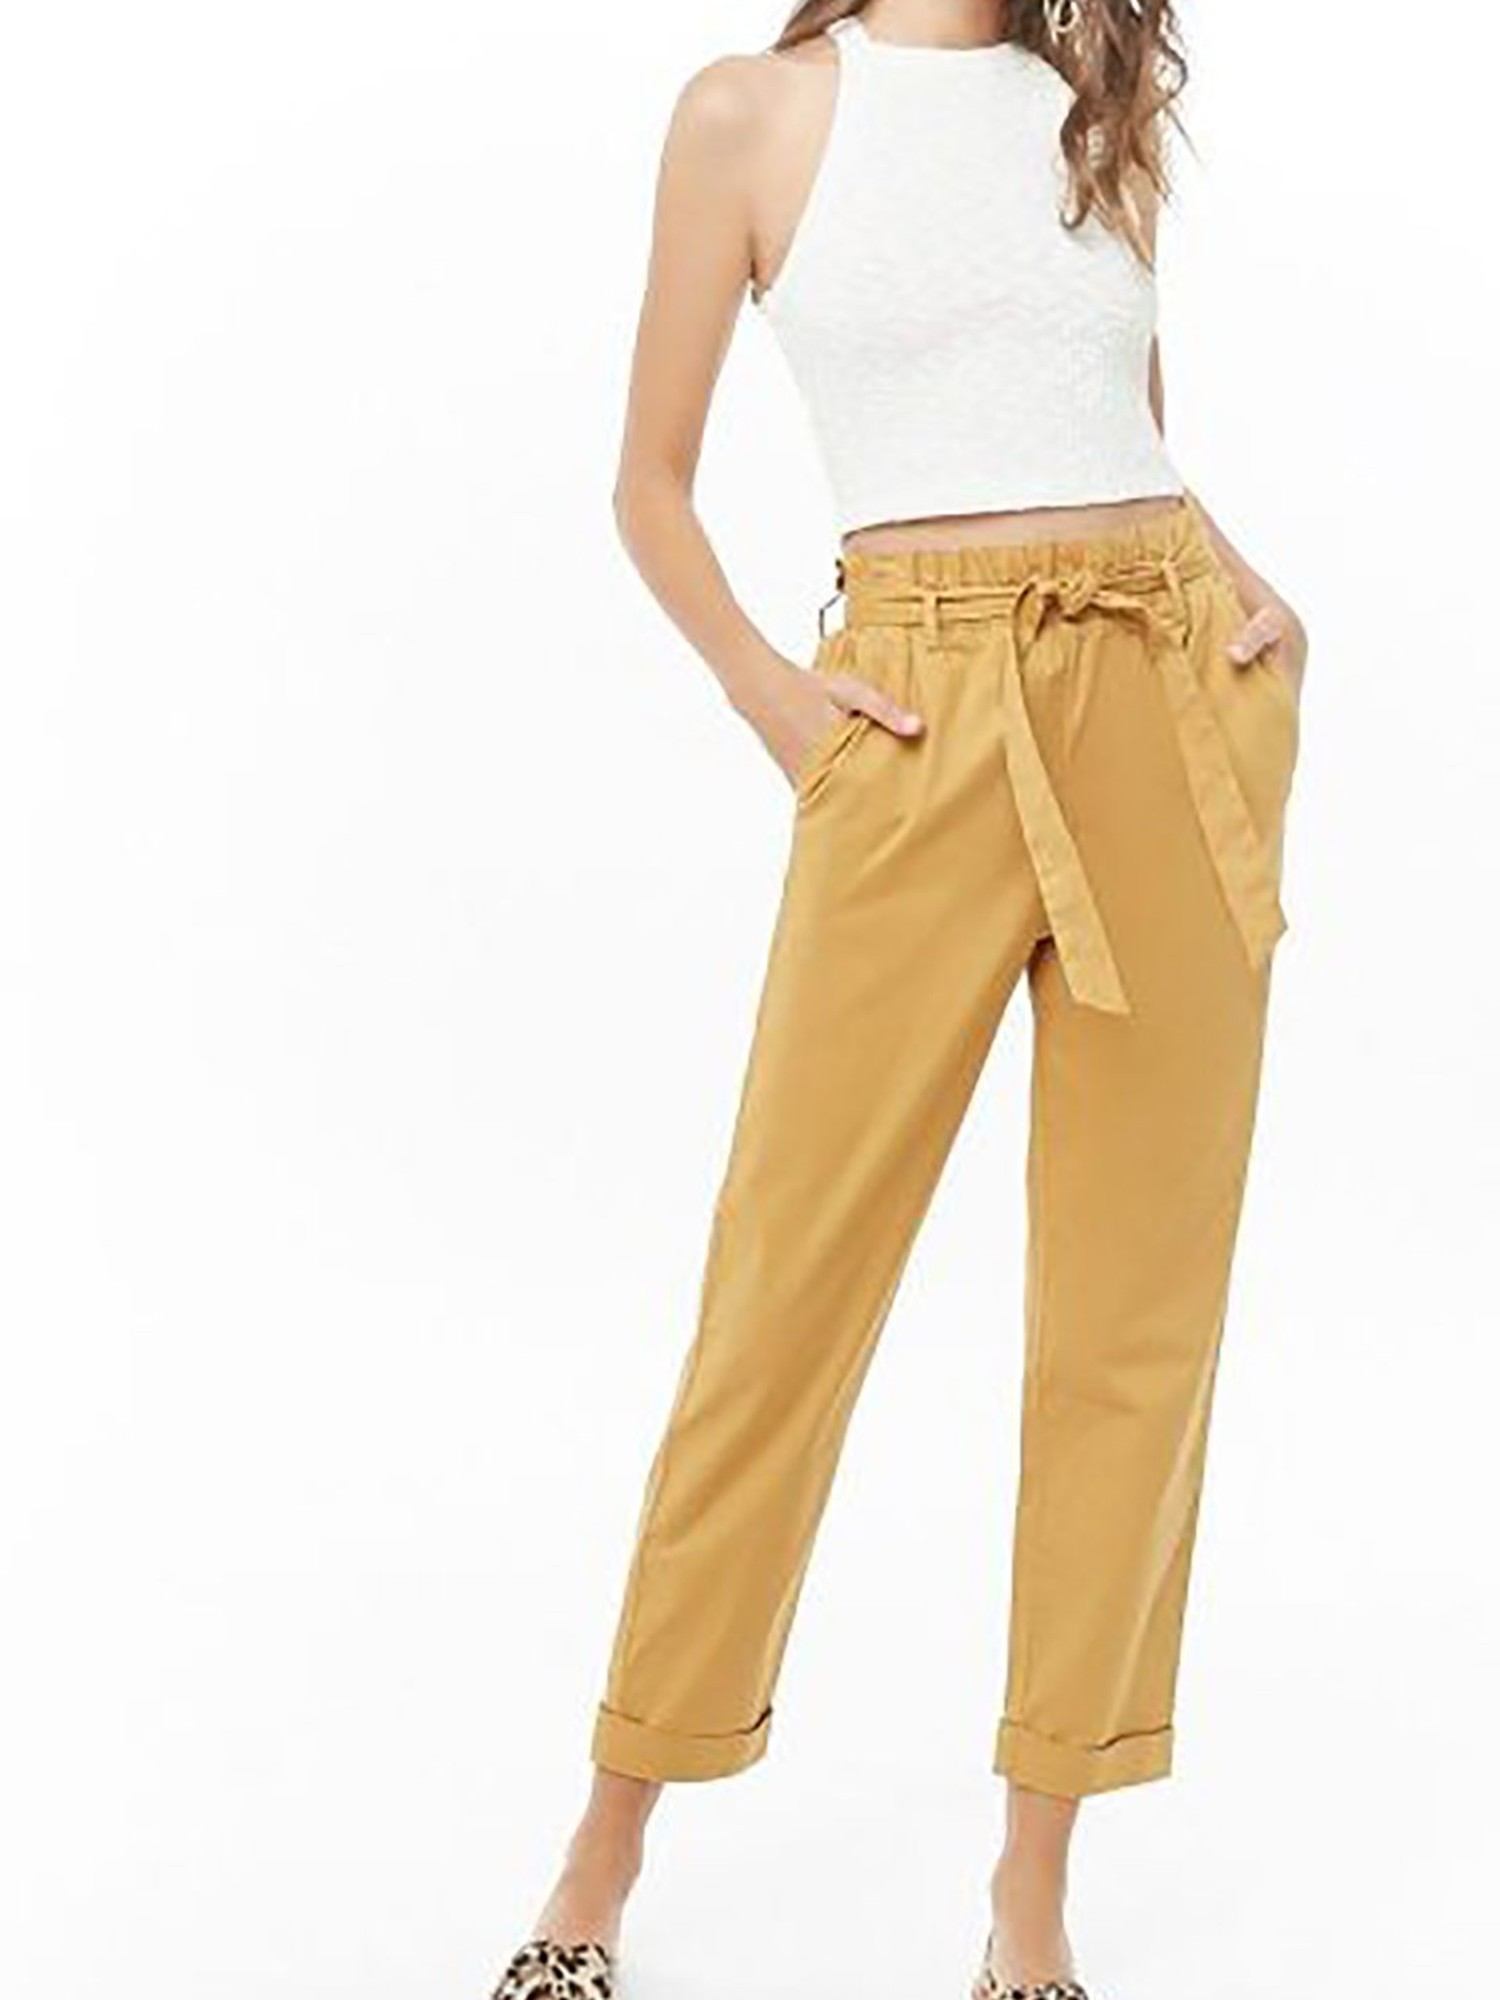 Buy Forever 21 Red Striped Pants for Women Online  Tata CLiQ